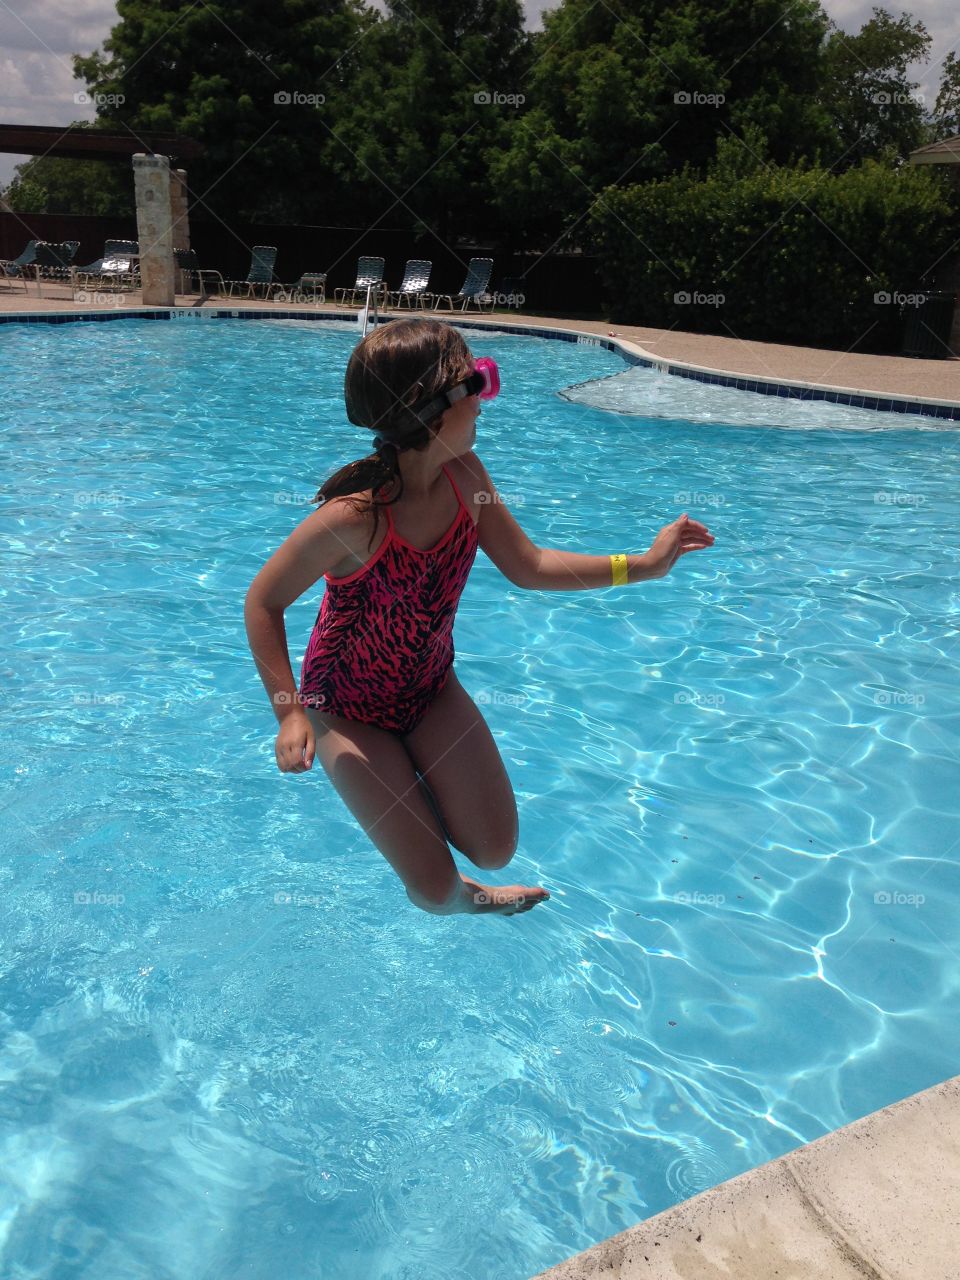 Do the twist . Girl jumping in the pool while twisting in the air